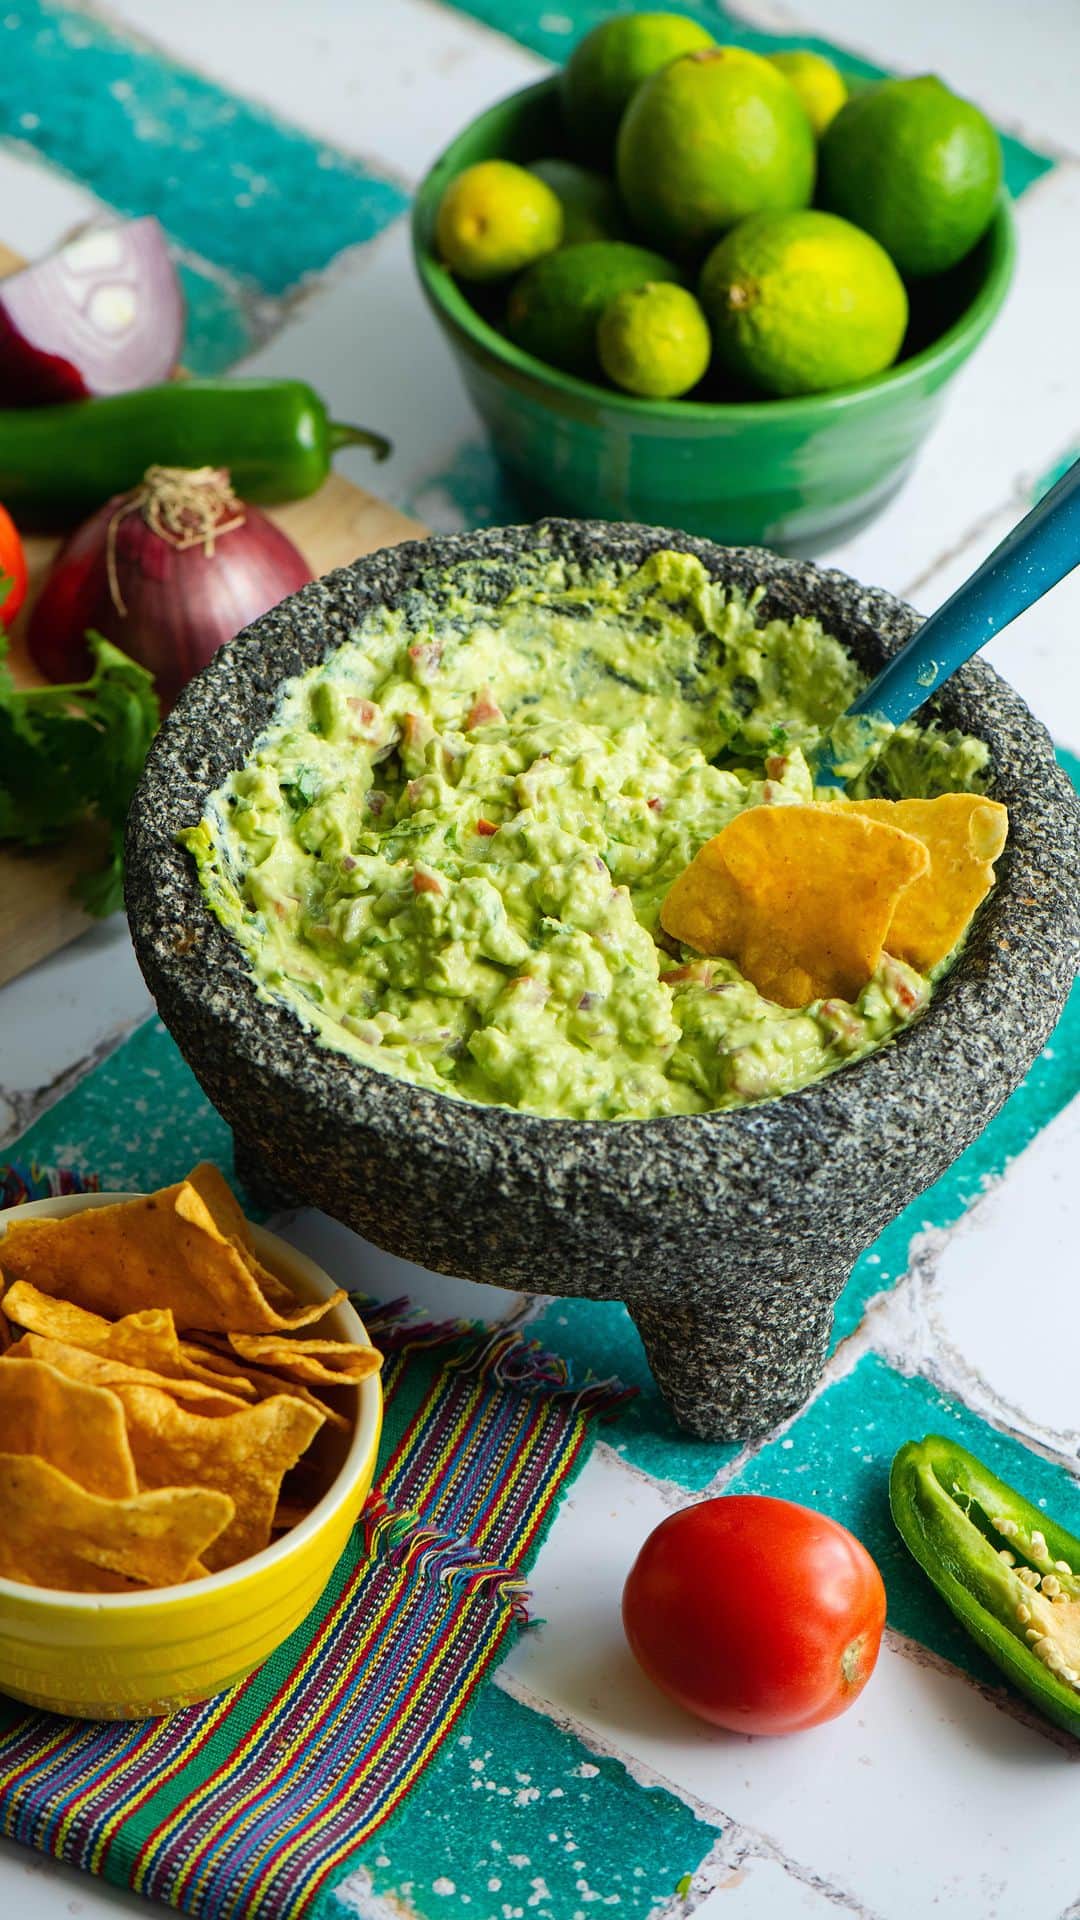 Chobaniのインスタグラム：「Guacamole crafted with Greek Yogurt is a delicious way to celebrate #CincodeMayo. And guess what? By adding Chobani® Greek Yogurt to the mix, your guacamole will be creamier. Enjoy!  🥑 Ingredients 🥑 • 2 large avocados • 2 tablespoons fresh lime juice • ¼ cup Chobani® Greek Yogurt • ½ teaspoon sea salt • 1 large Roma tomato, chopped • ¼ cup red onion, chopped • 1 large jalapeño, finely chopped • ⅓ cup fresh cilantro, chopped  ⭐ Directions ⭐ 1️⃣ Carefully cut lengthwise around the avocados. Twist to open and remove pits. Transfer avocado flesh to a medium bowl. Discard skin. 2️⃣ Lightly mash avocado. Stir in lime, yogurt, and salt. Continue stirring until mixed well. Fold in onion, tomato, jalapeño, and cilantro. Serve with corn tortilla chips.  #guacamole #greekyogurtrecipes #snackideas」